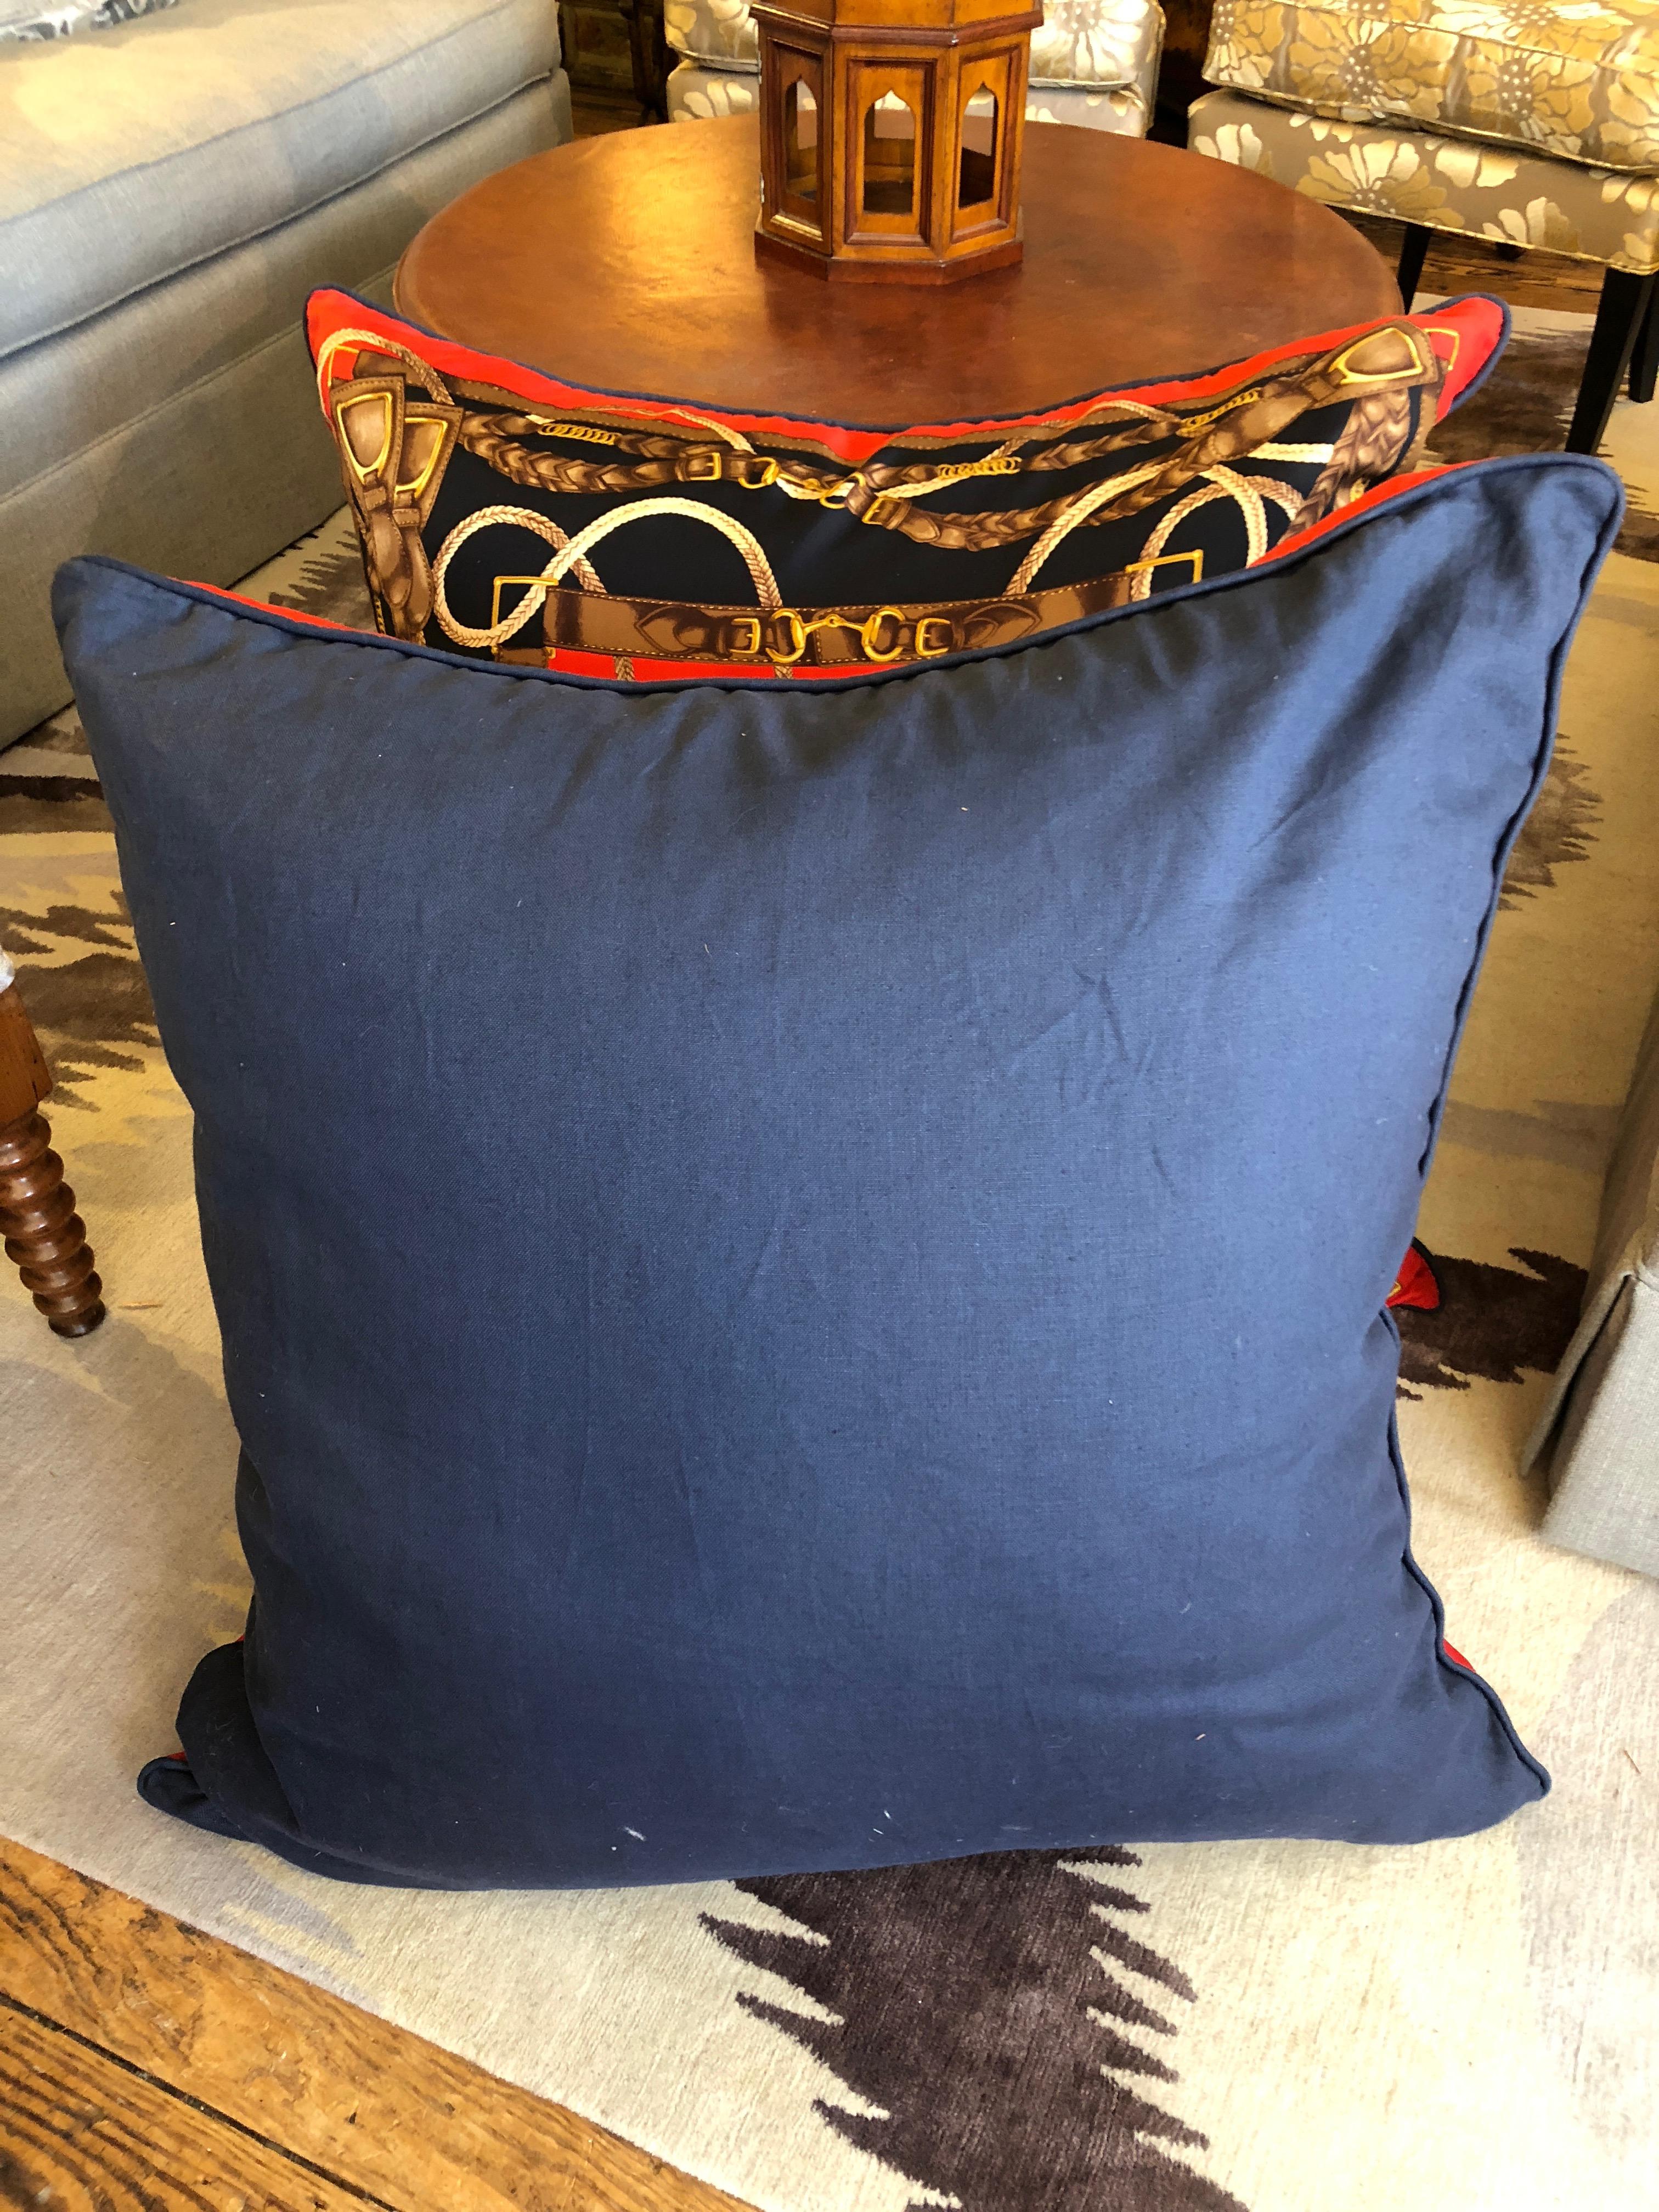 American Sumptuous Set of Ralph Lauren Pillows in Red and Navy Blue